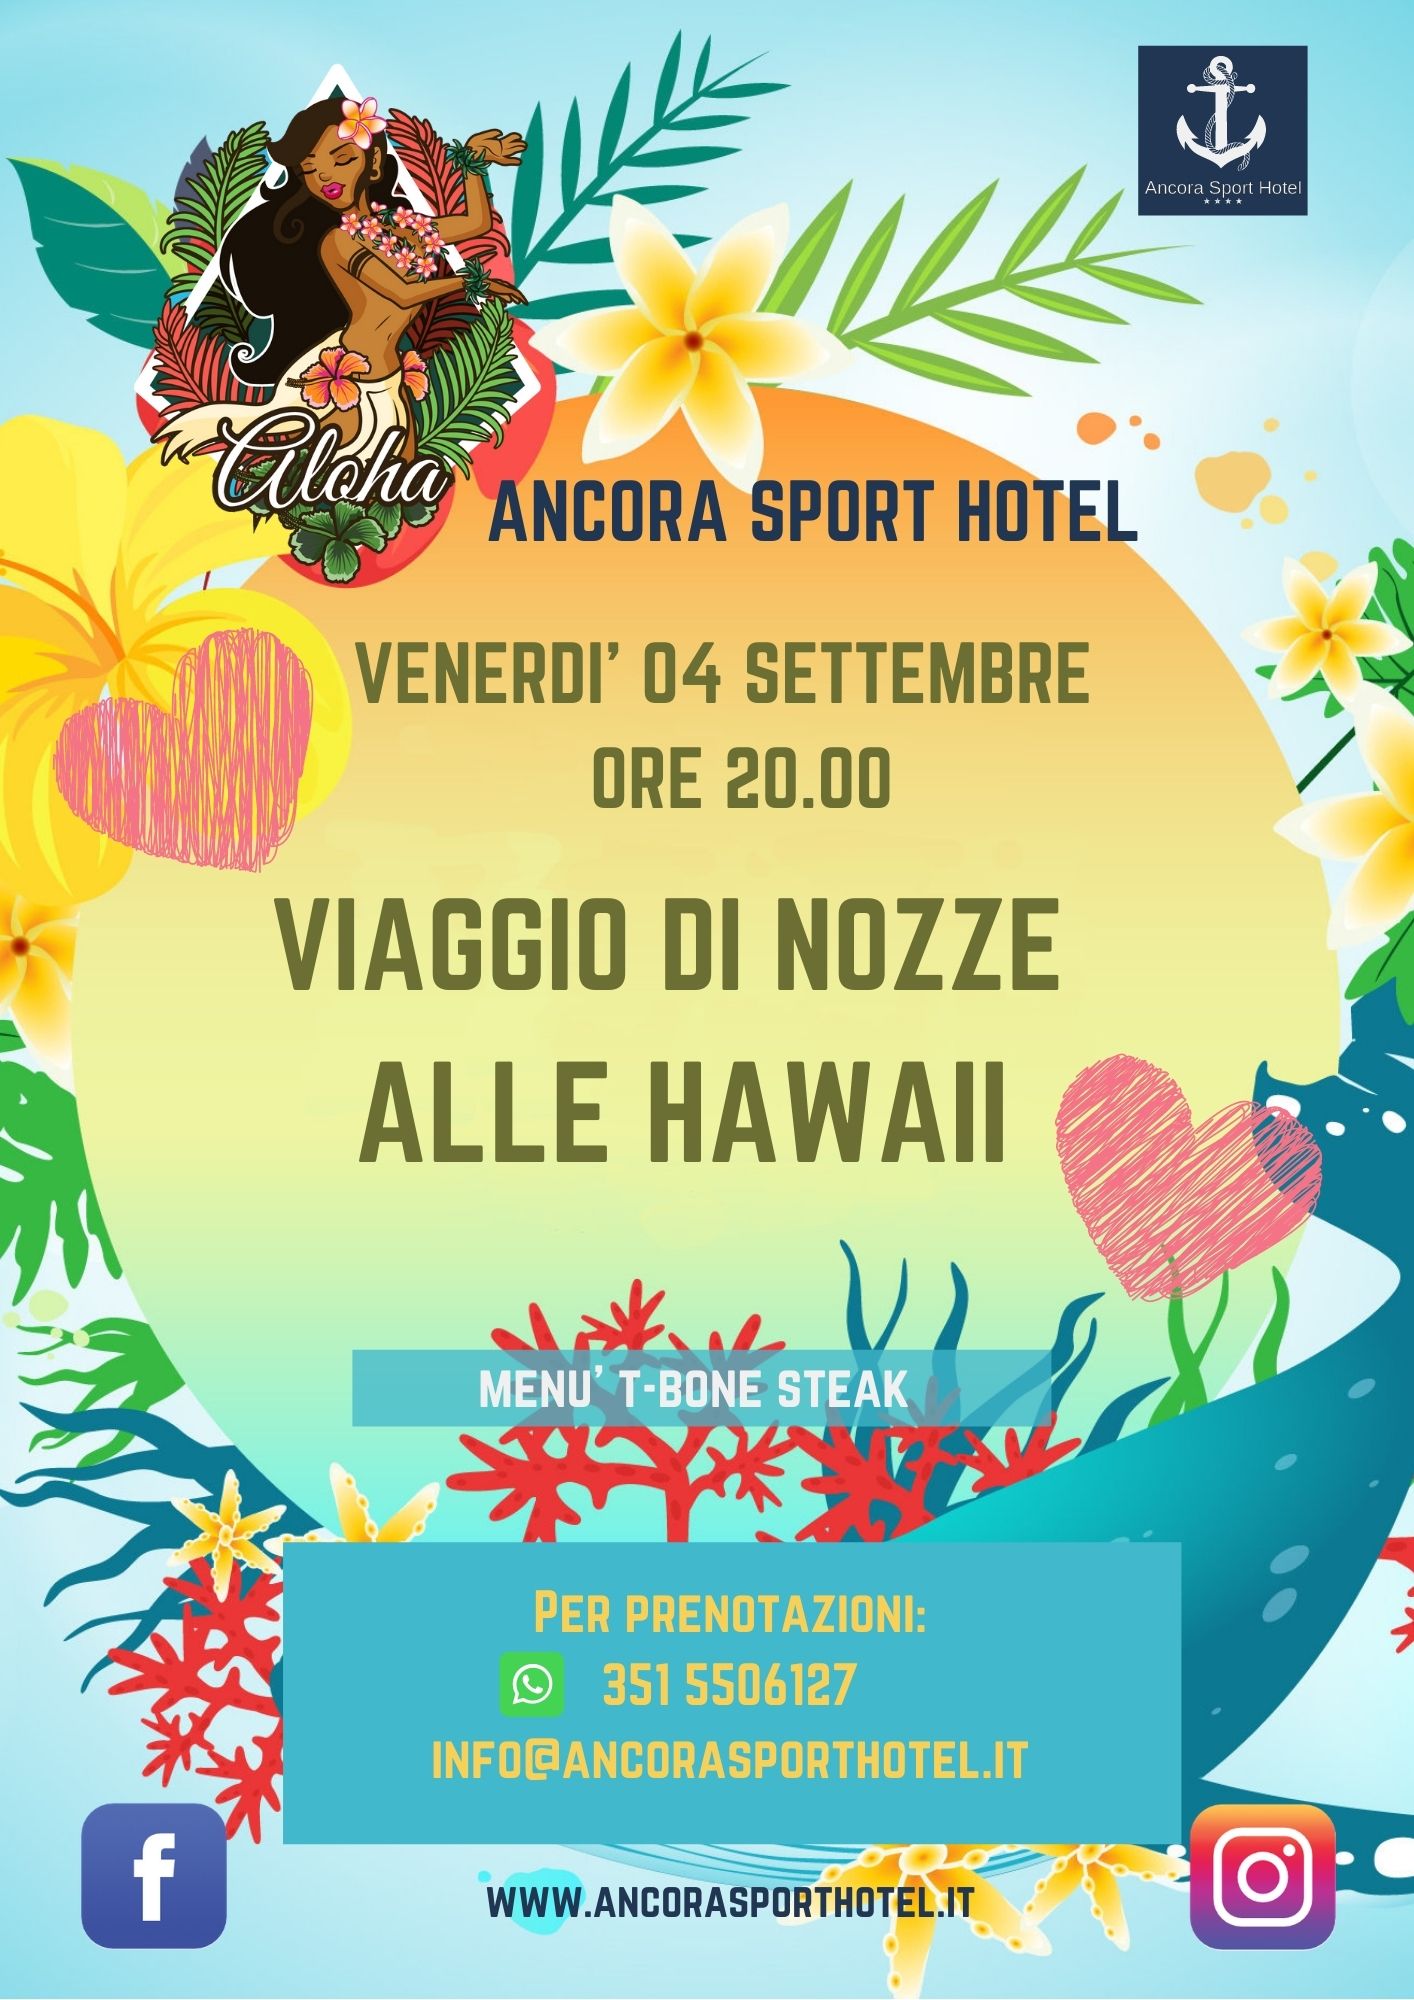 You are currently viewing Viaggio di nozze alle hawaii